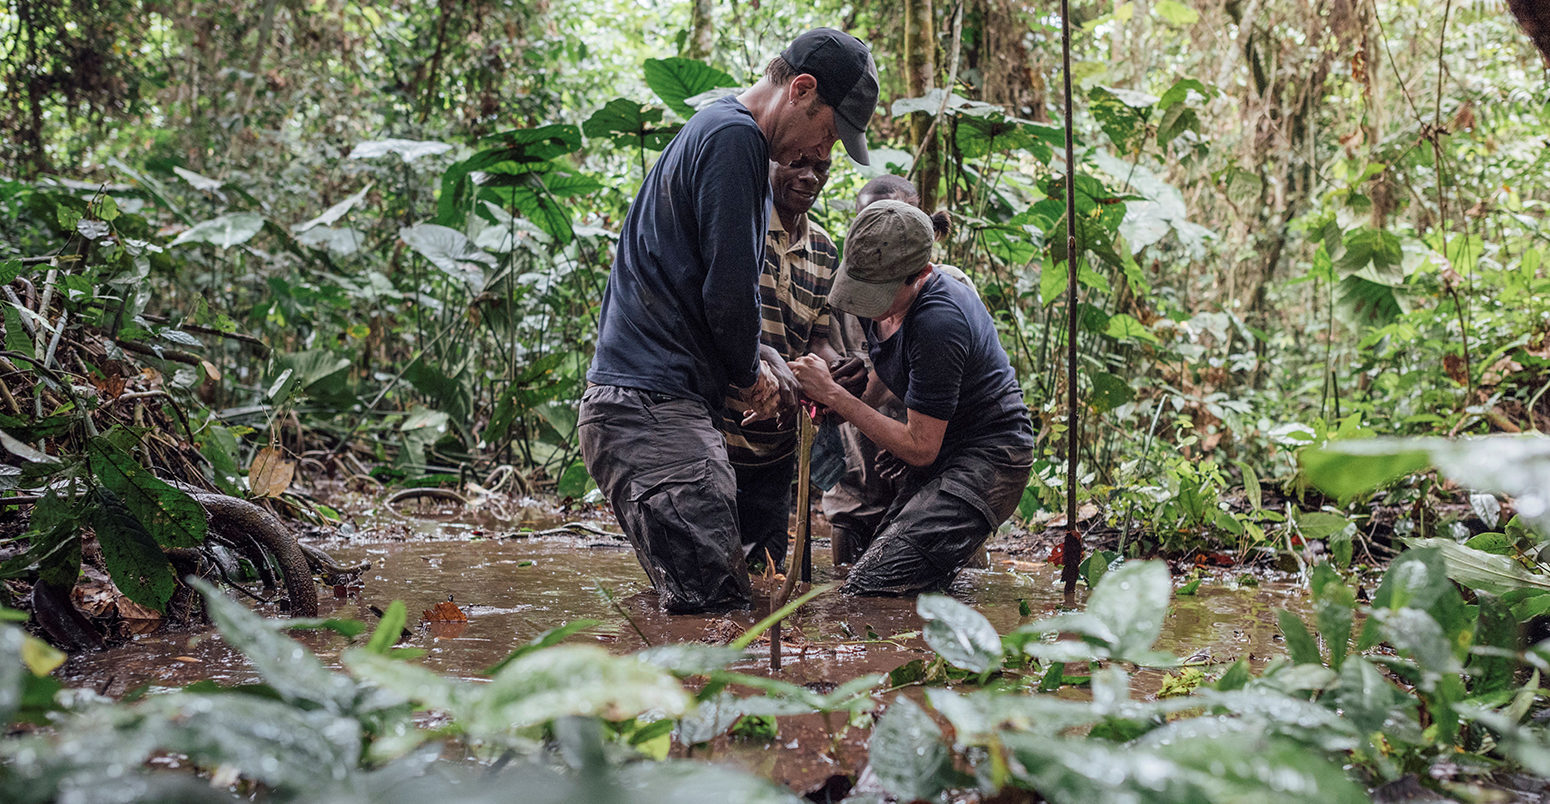 Extracting a sample from the Congo basin peatland.